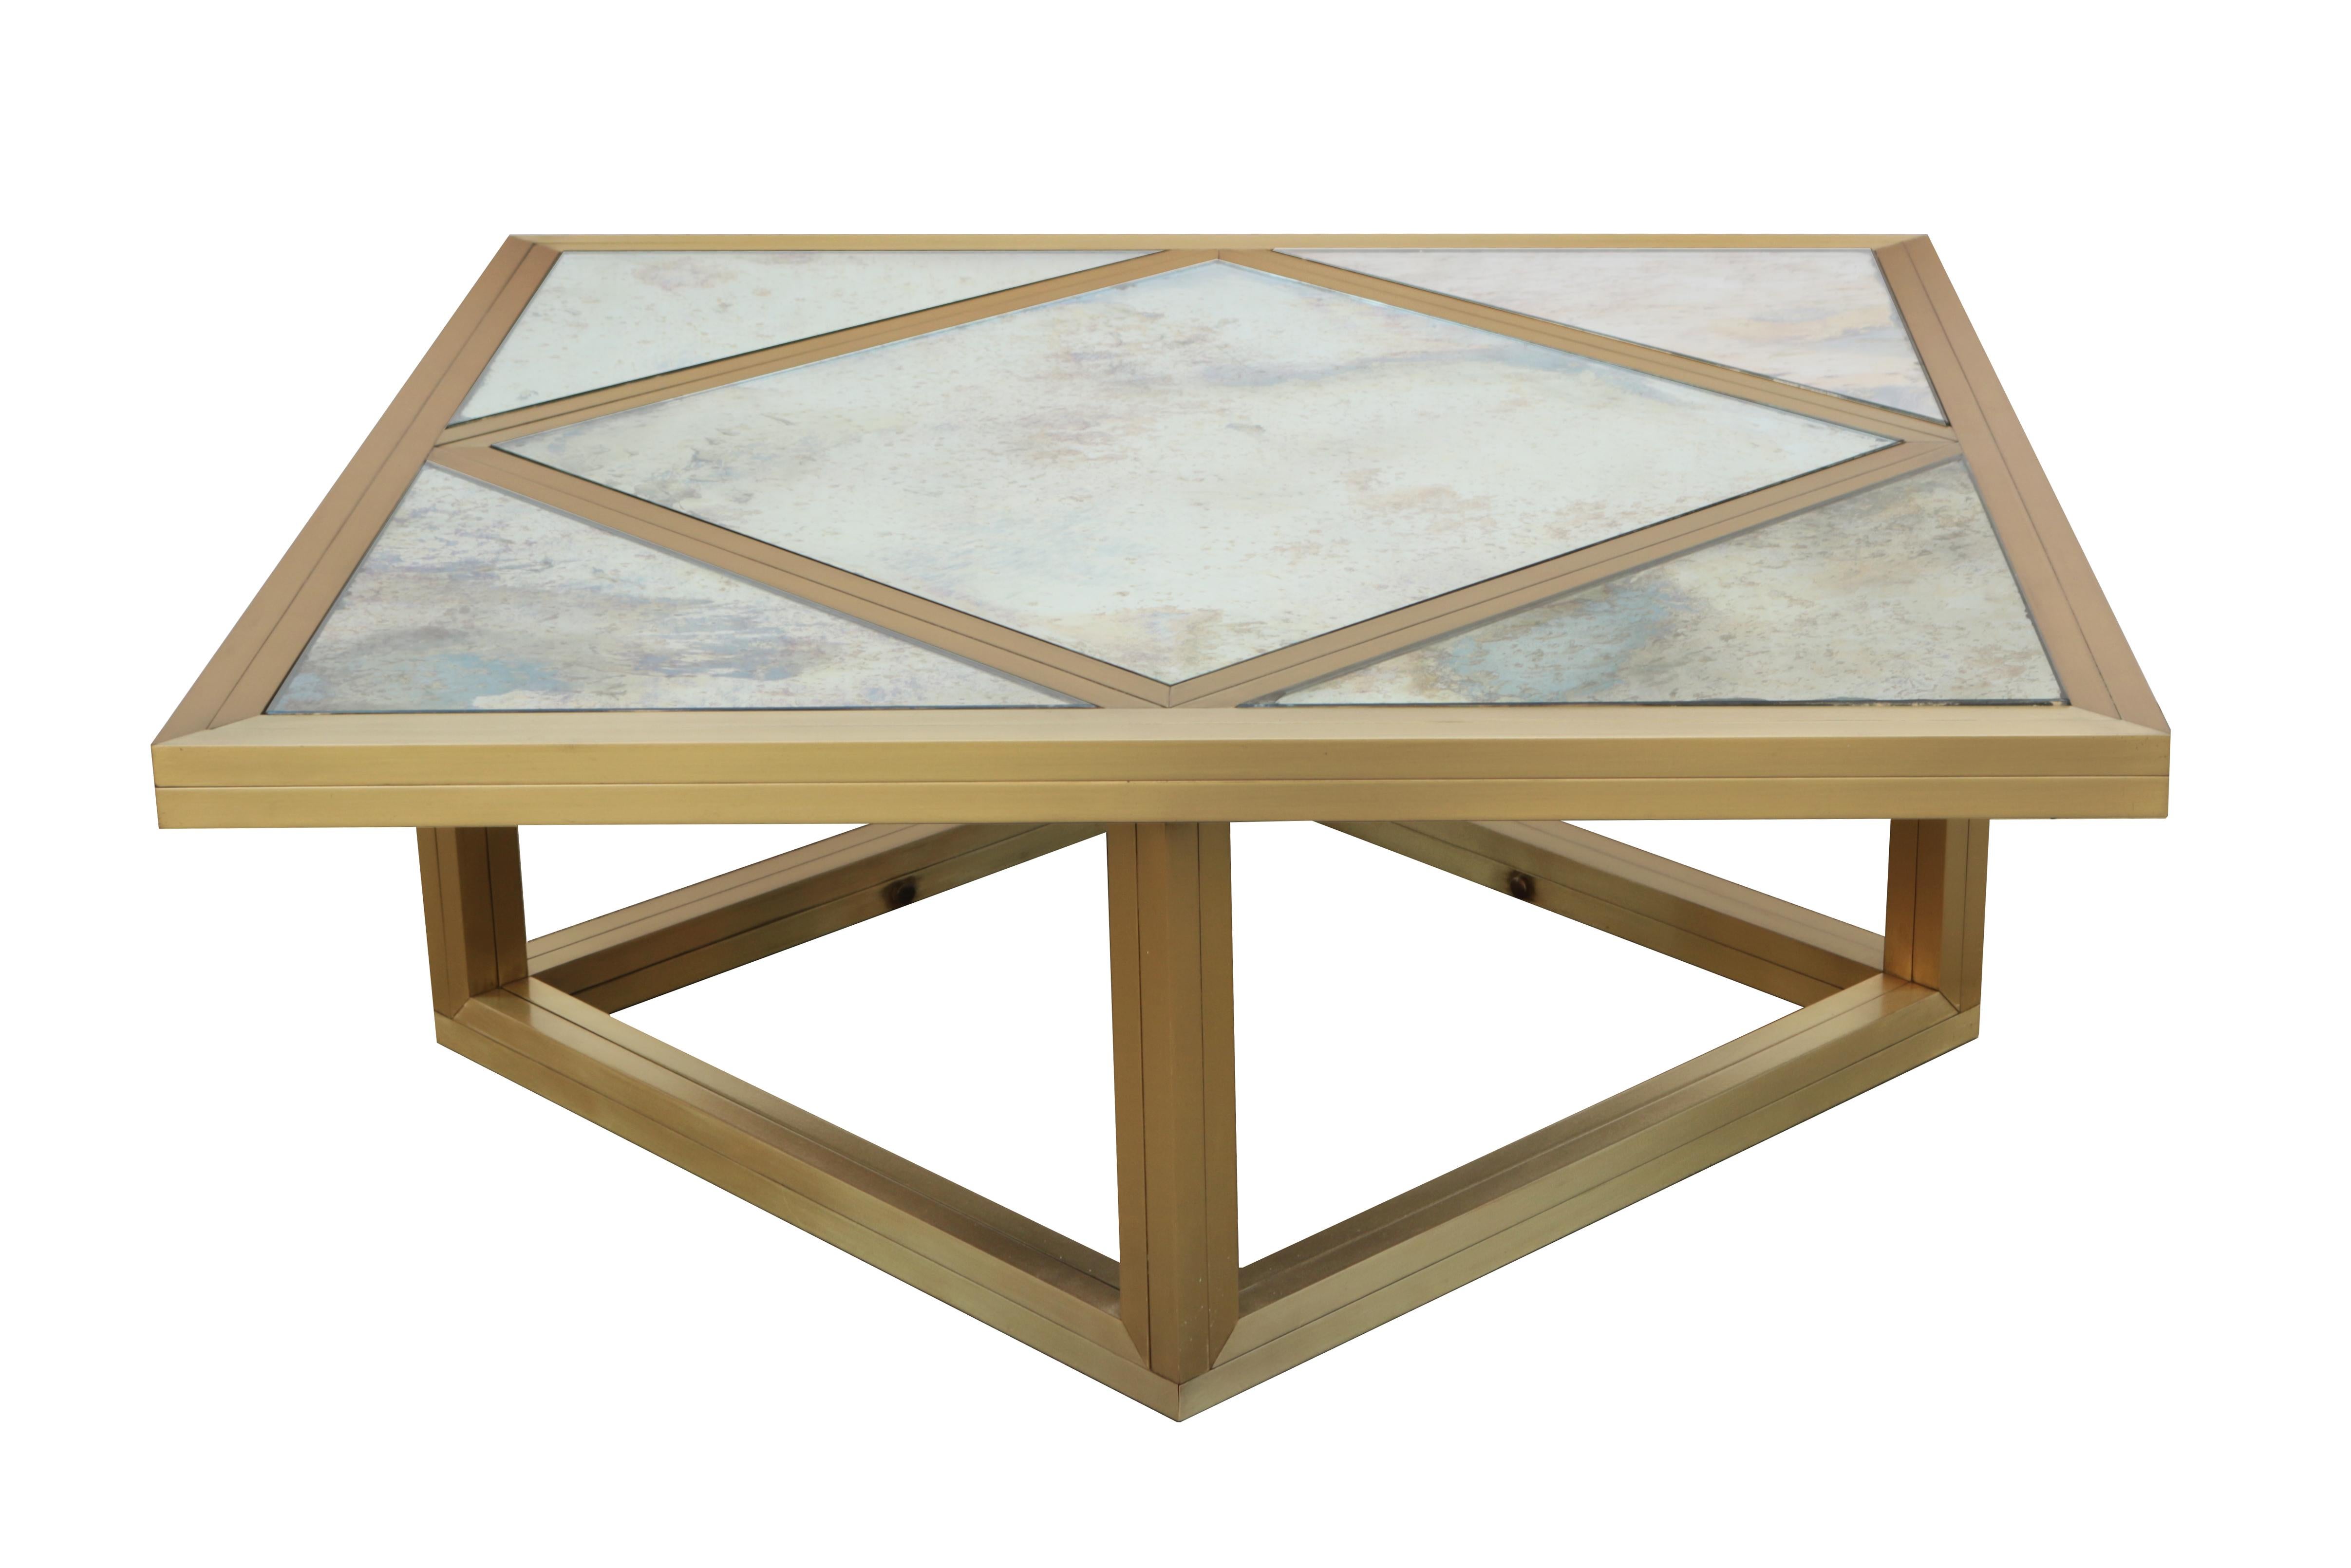 An Italian modernist cocktail table.
Geometric design in brass with
aged mirror glass segmented top.
 